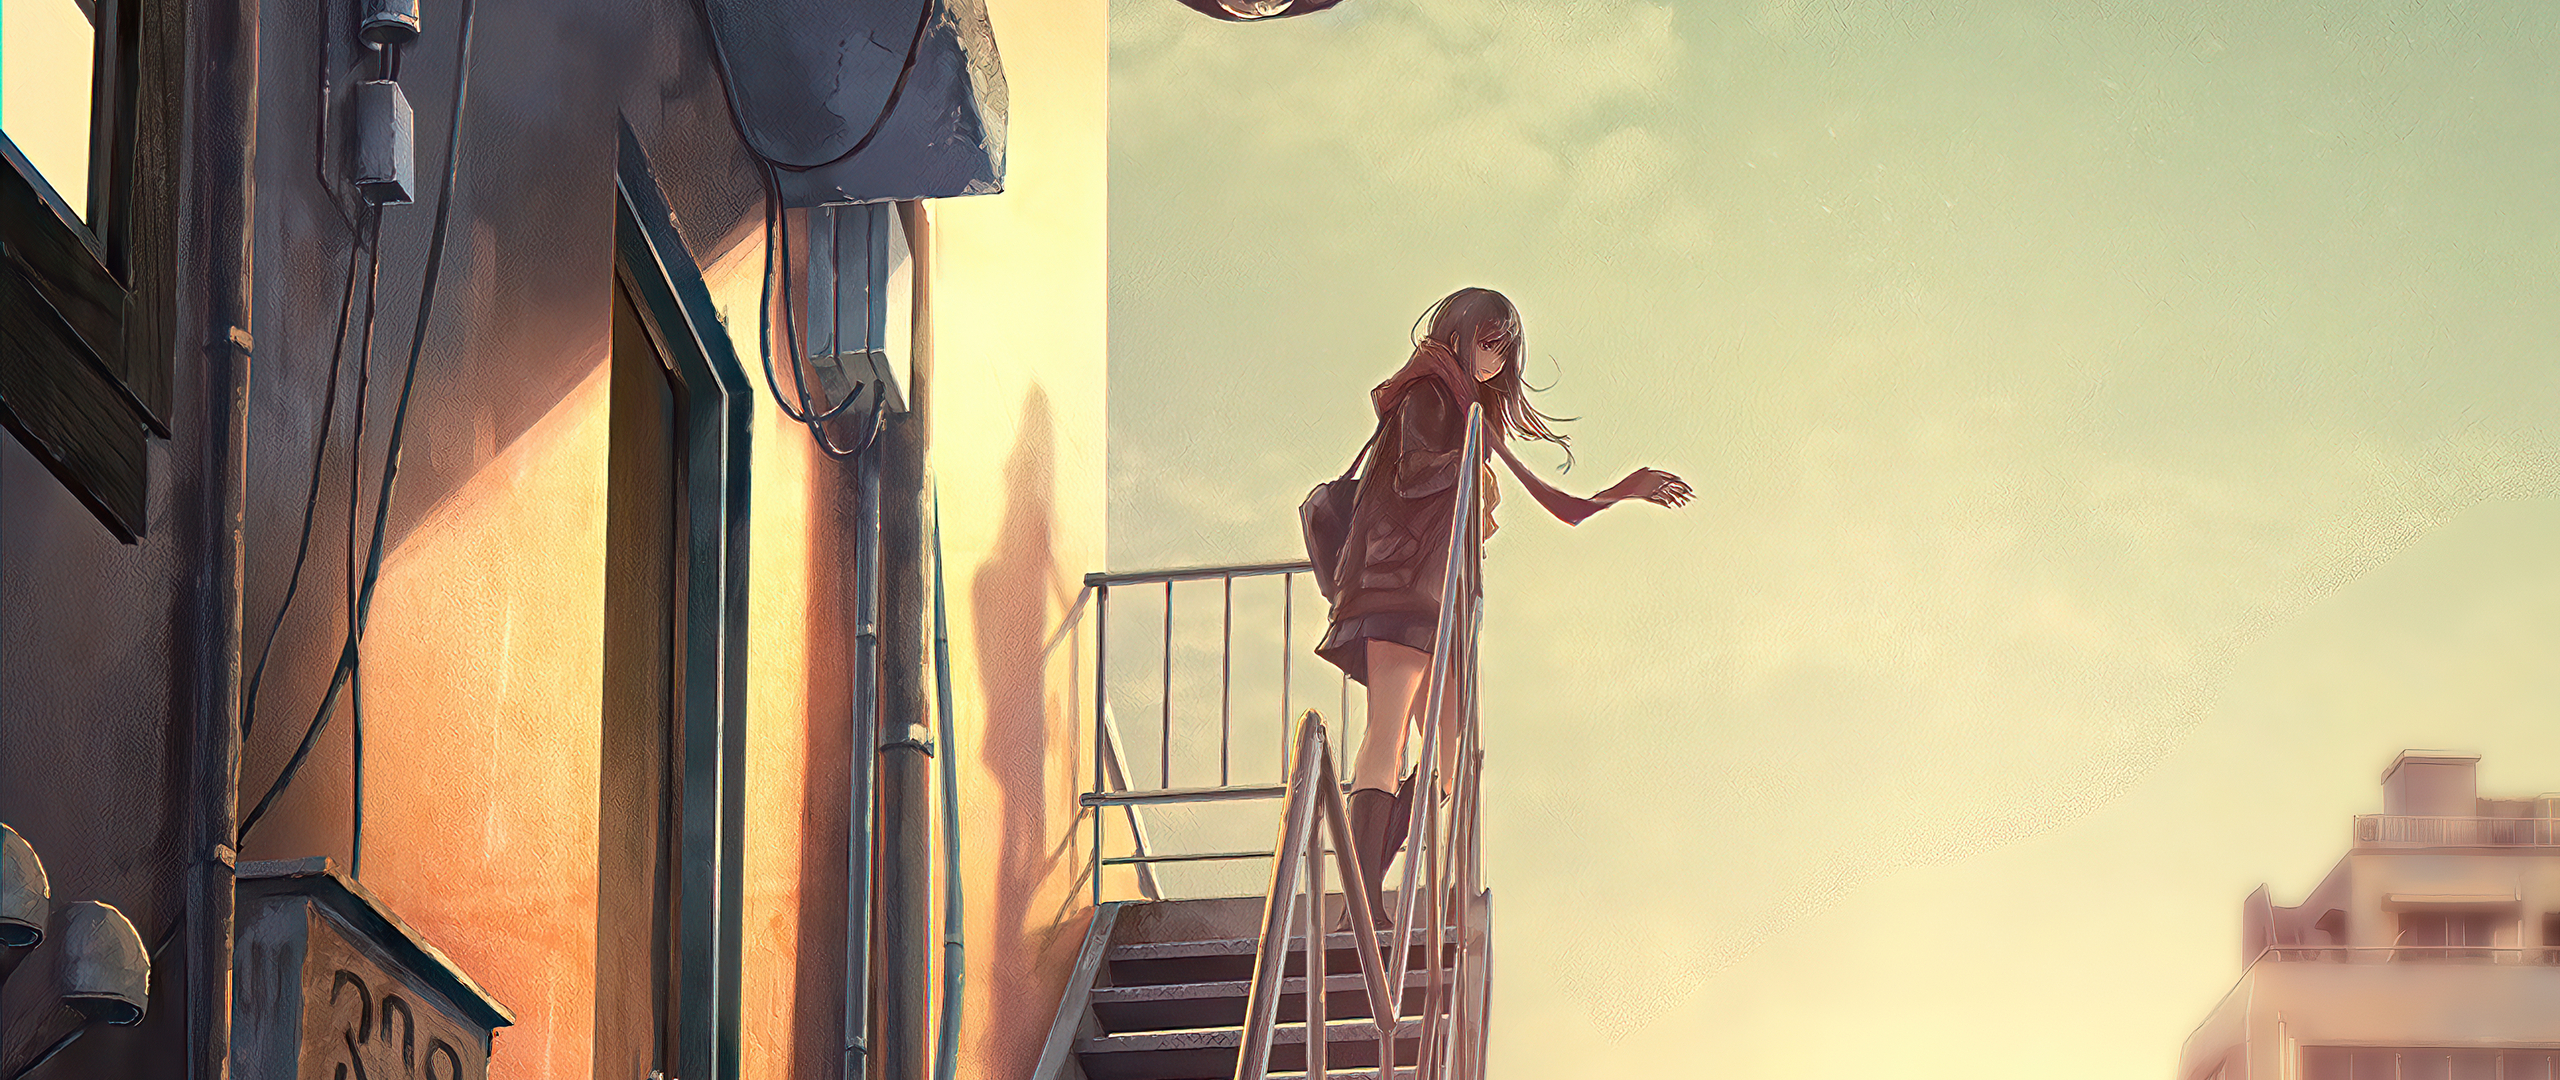 second-thoughts-anime-girl-4k-nr-2560x1080.jpg